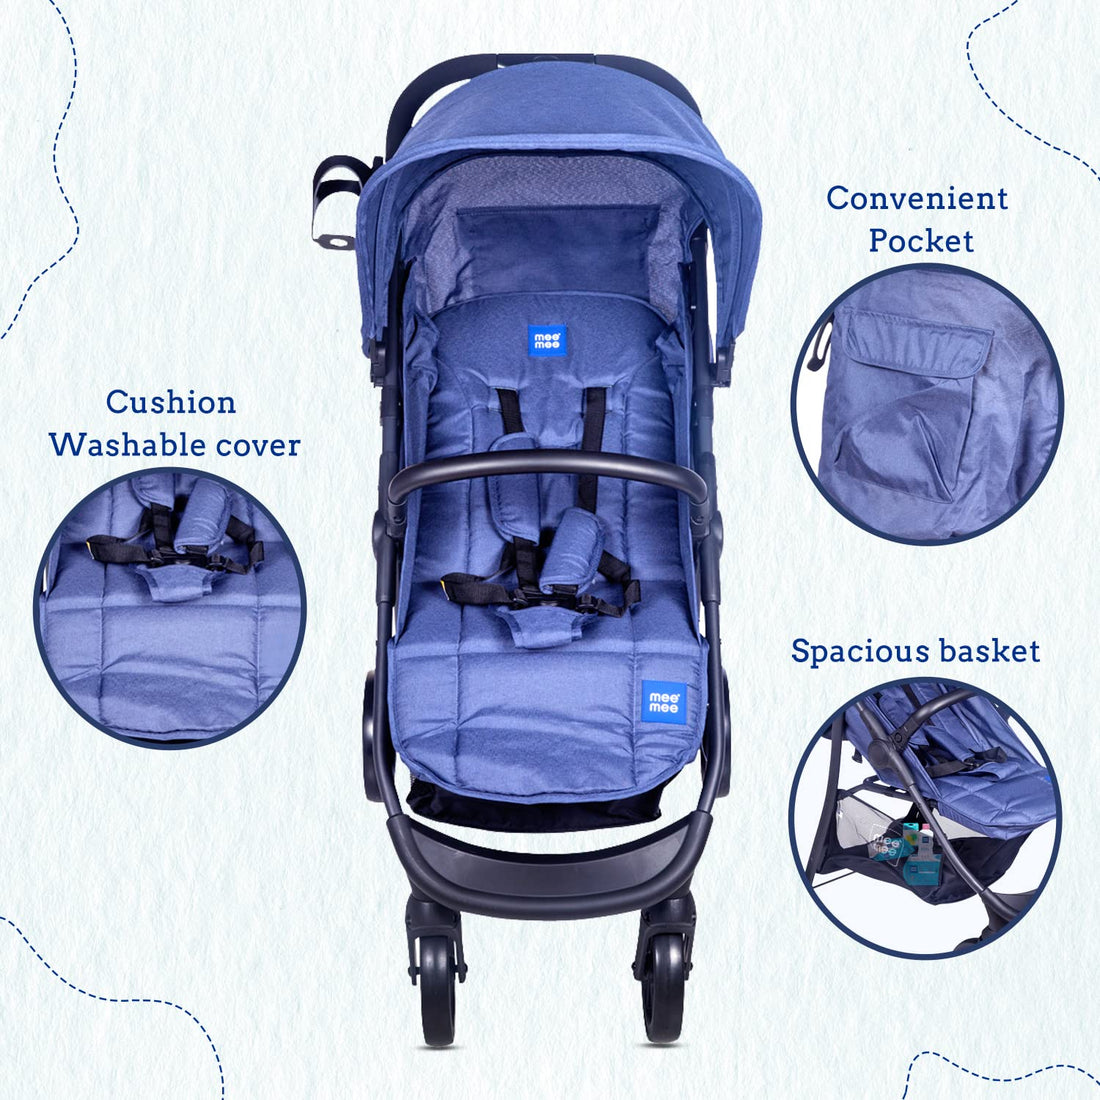 Mee Mee - Double cushion washable cover Baby Stroller